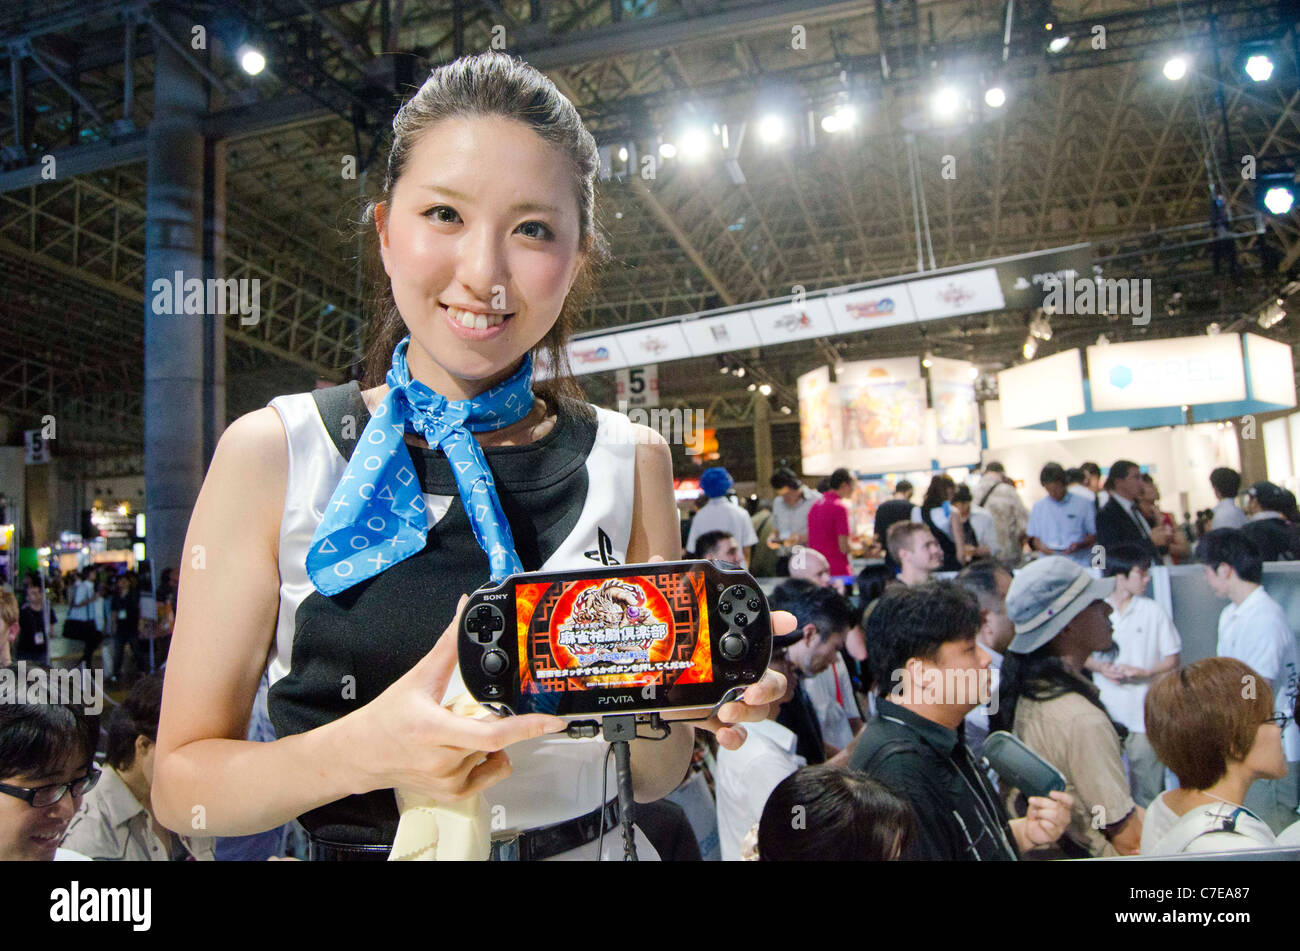 Sony's campaign girl poses for pictures with the PlayStation Vita during the Tokyo Game Show 2011. Stock Photo